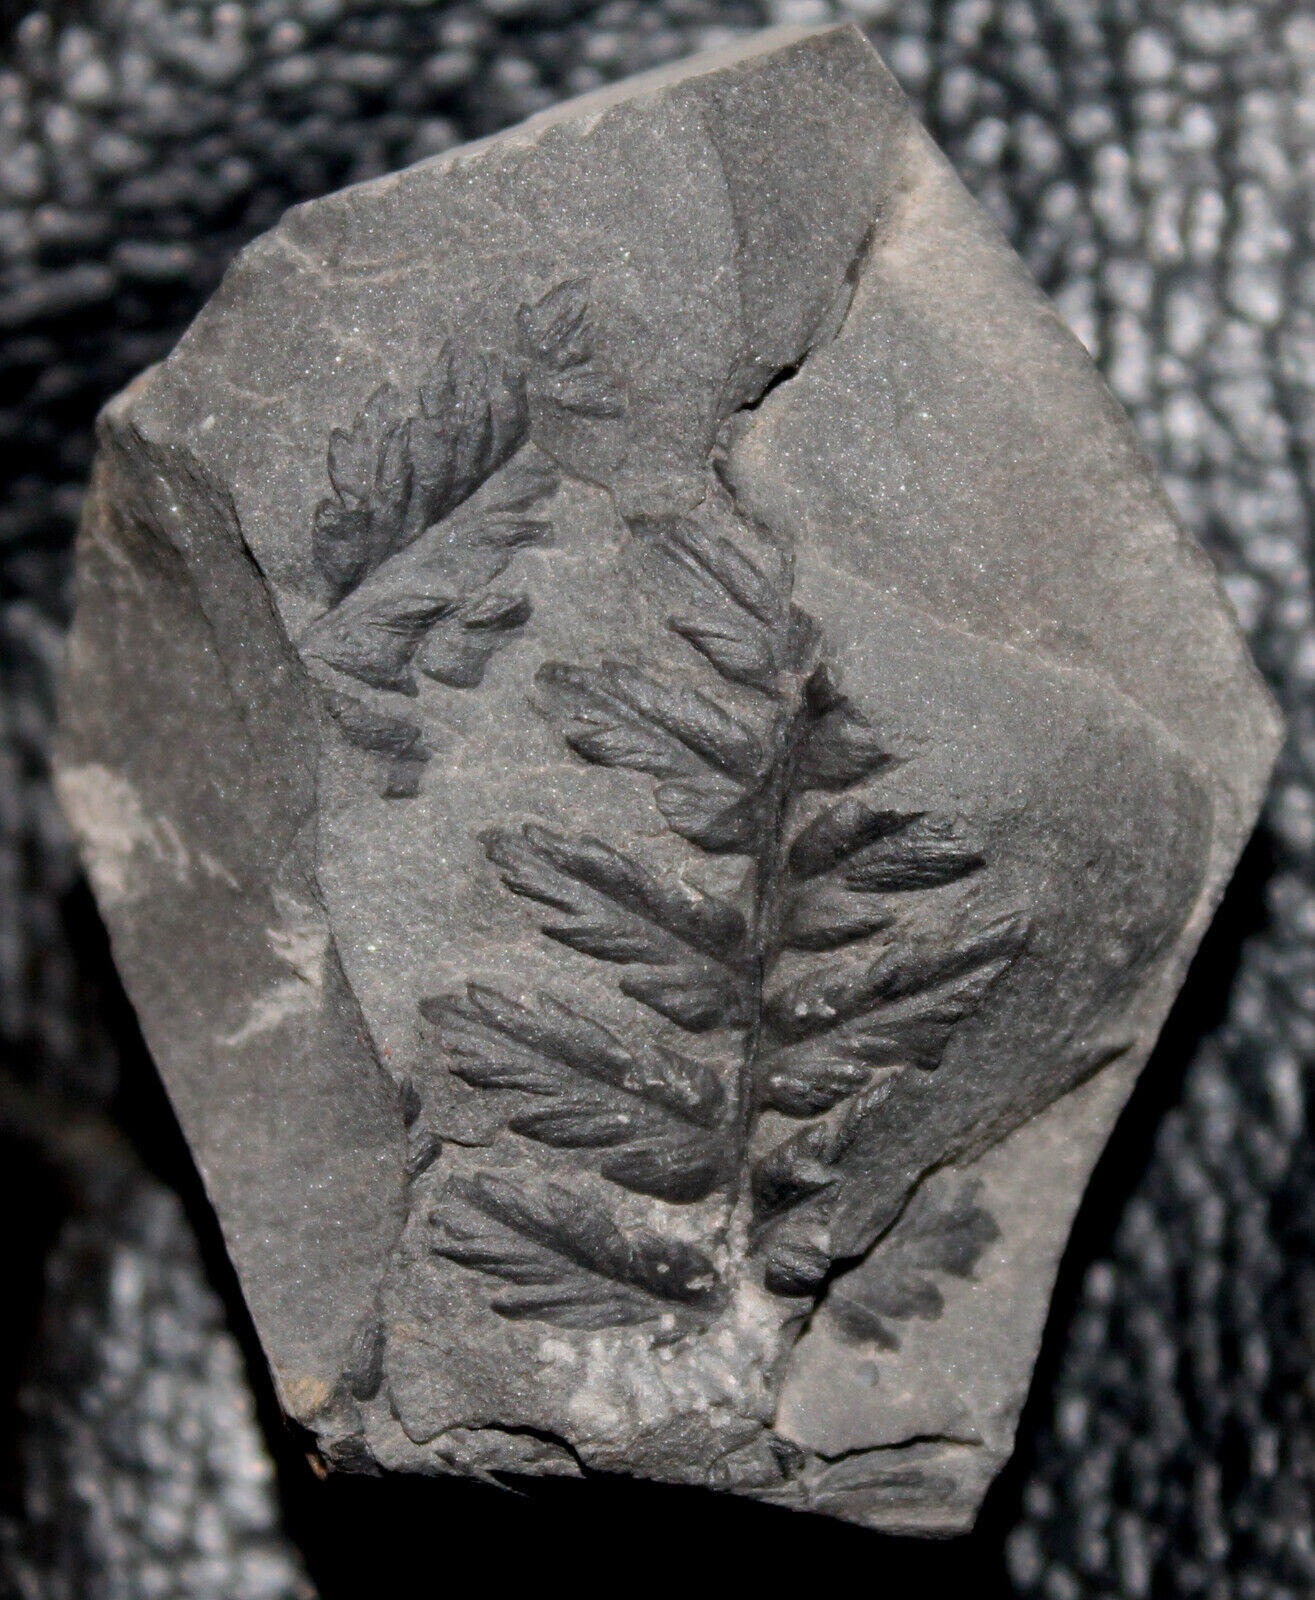 Mariopteris -Small, nice preserved fossil fern.